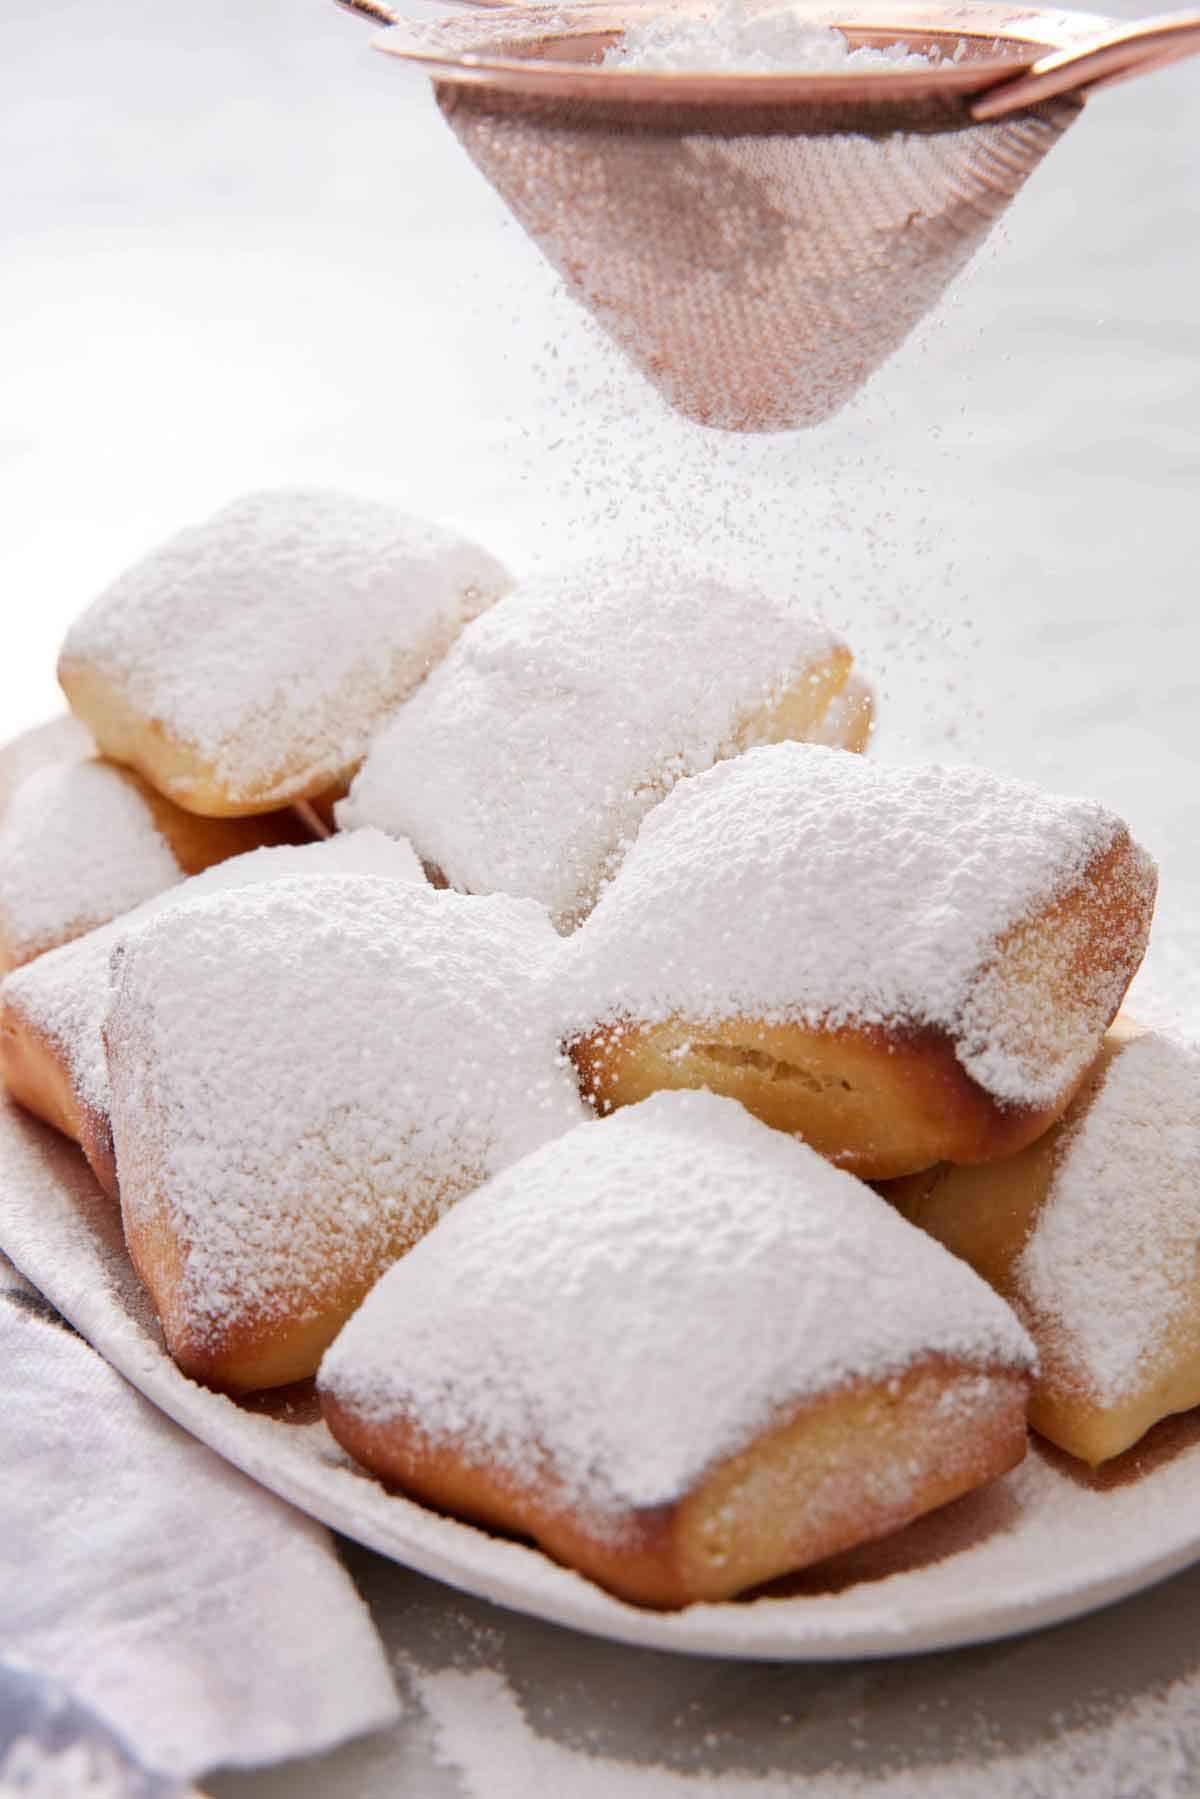 Powdered sugar dusted over a platter of air fryer beignets.